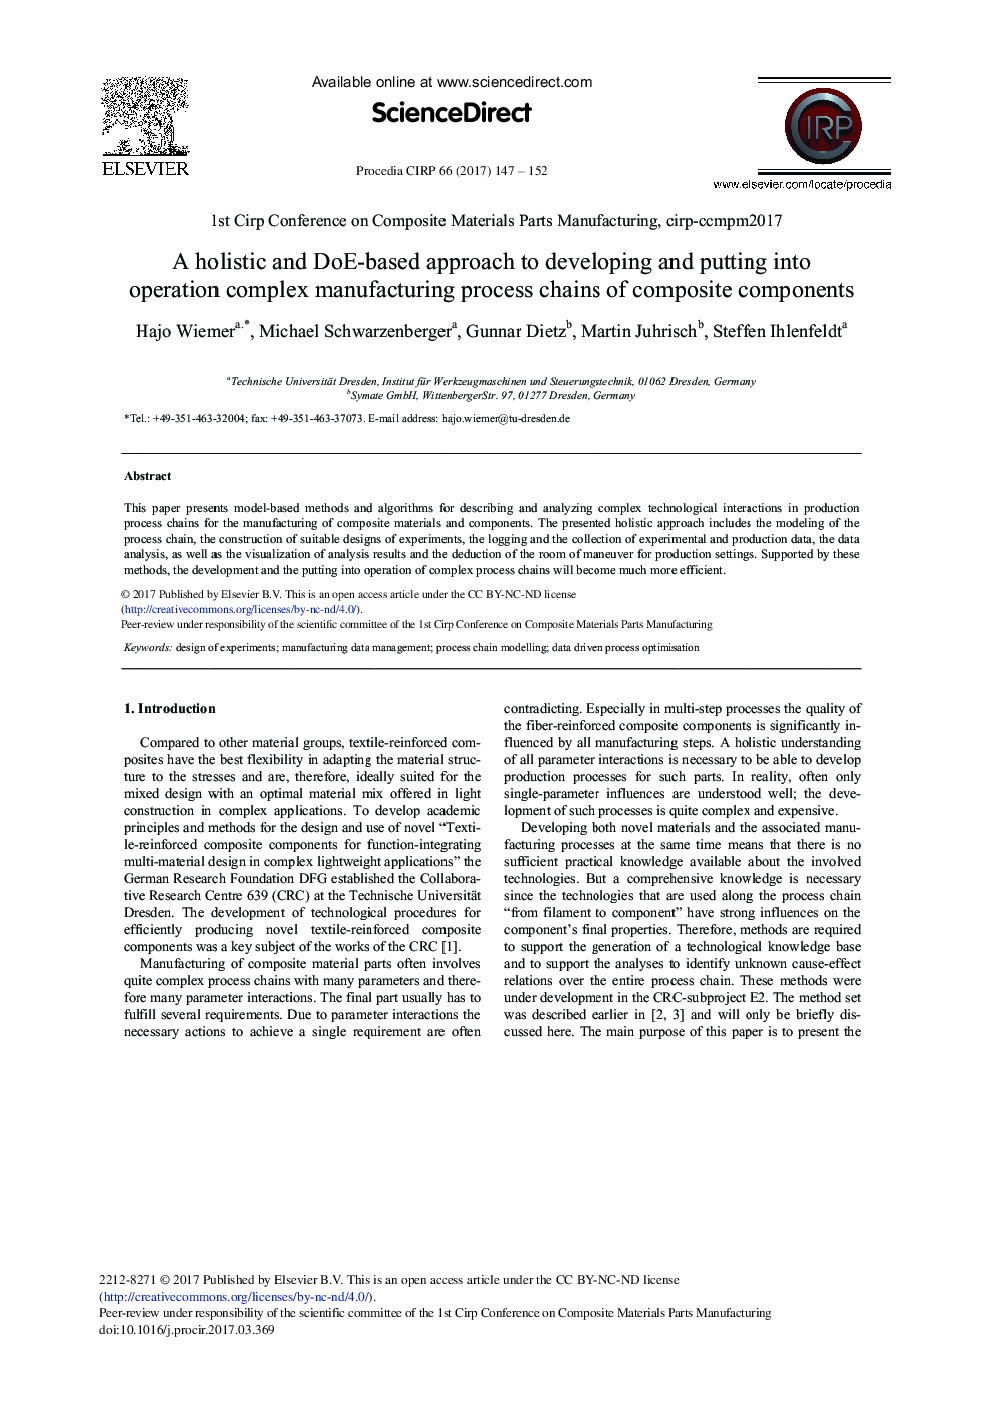 A Holistic and DoE-based Approach to Developing and Putting into Operation Complex Manufacturing Process Chains of Composite Components